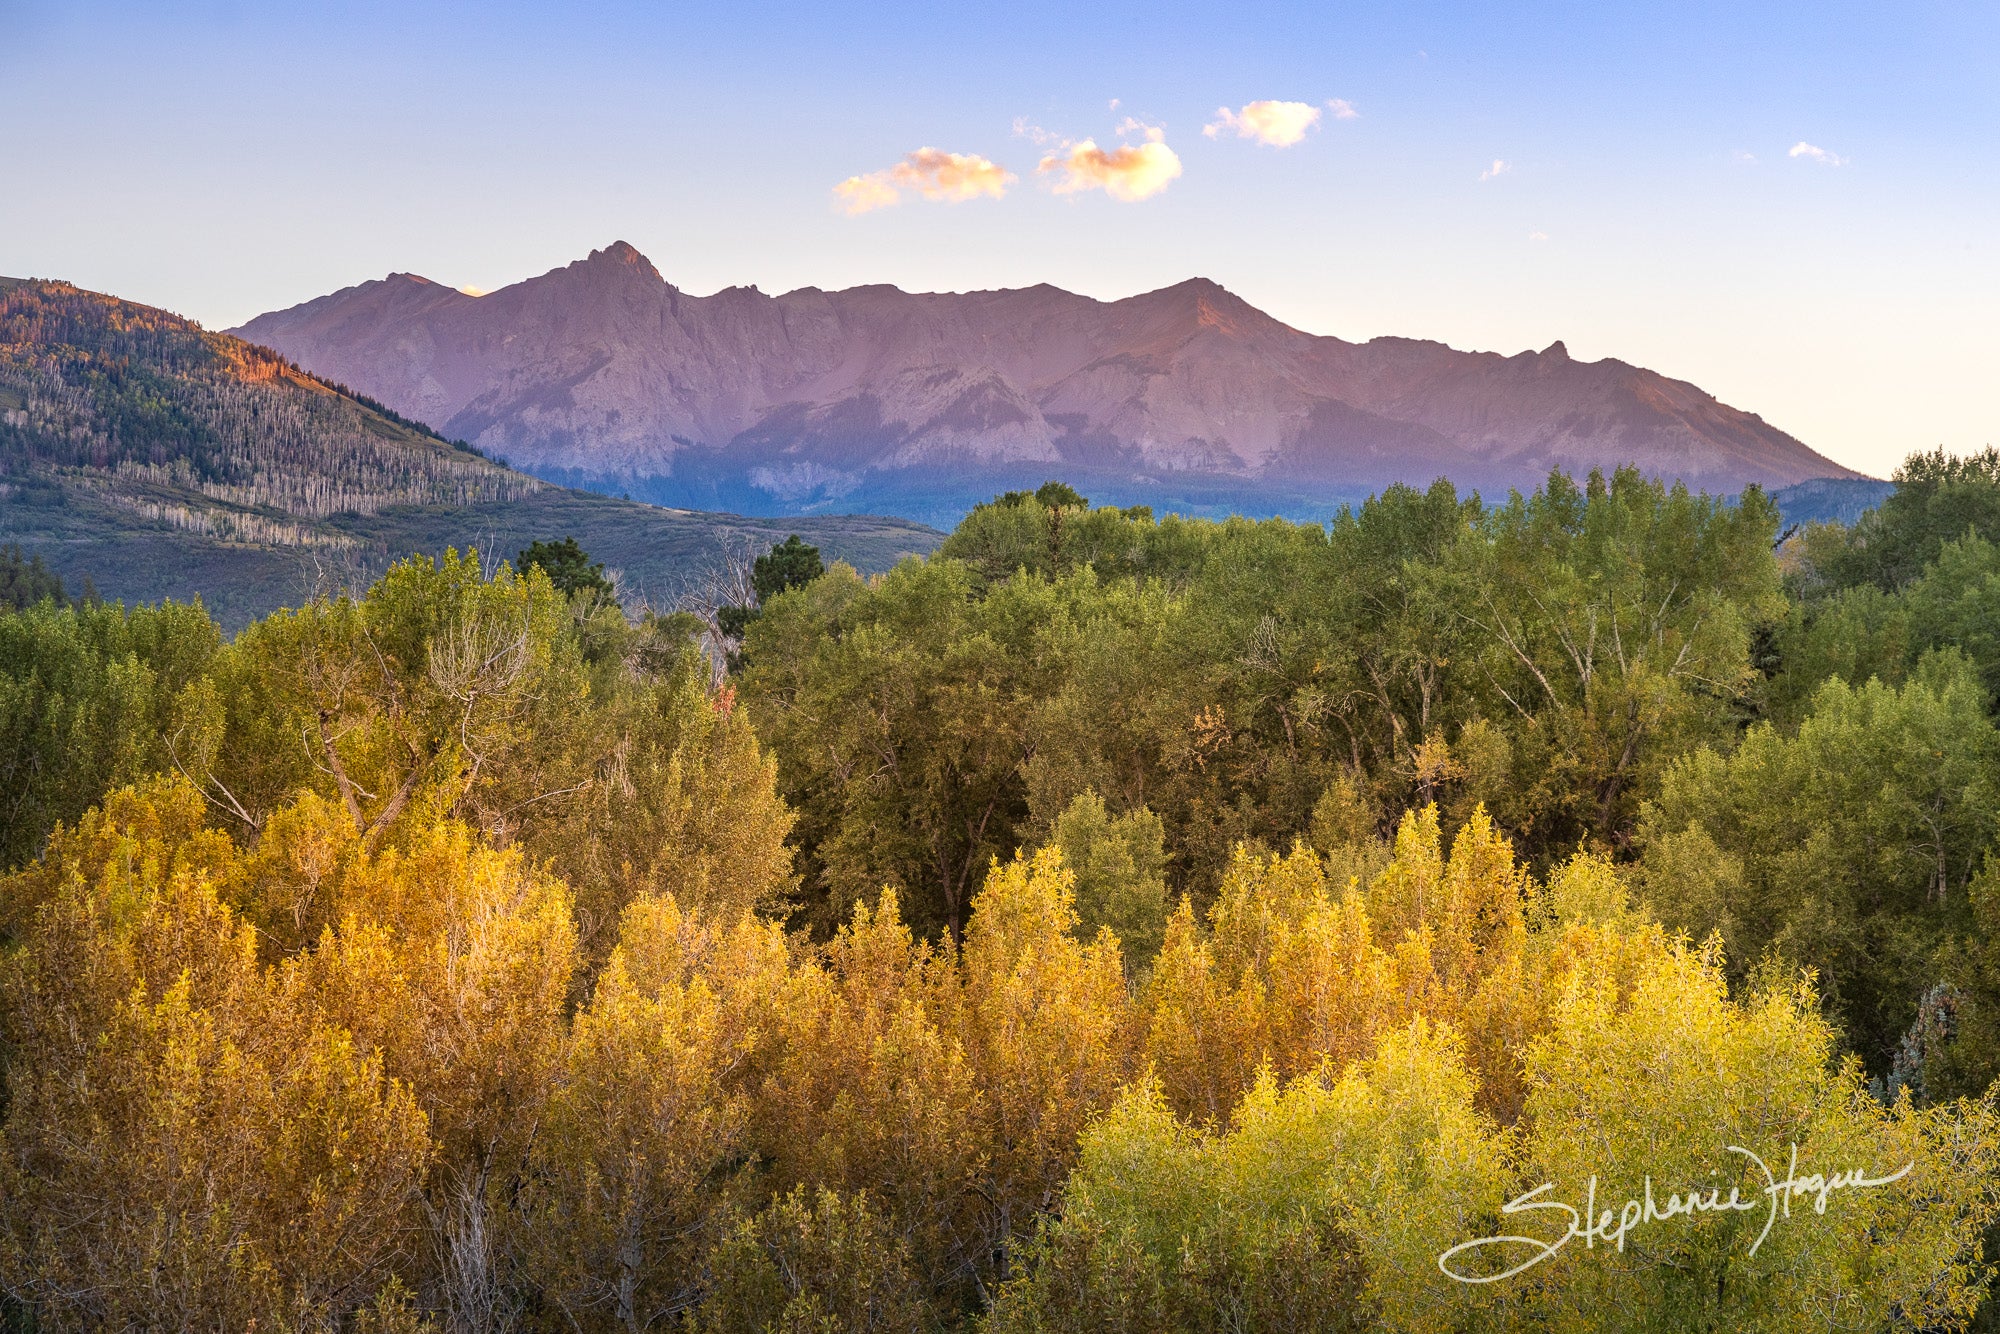 Fine art nature photography of of a setting sun providing a blanket of soft light over fall-colored trees and a dramatic mountain silhouette.